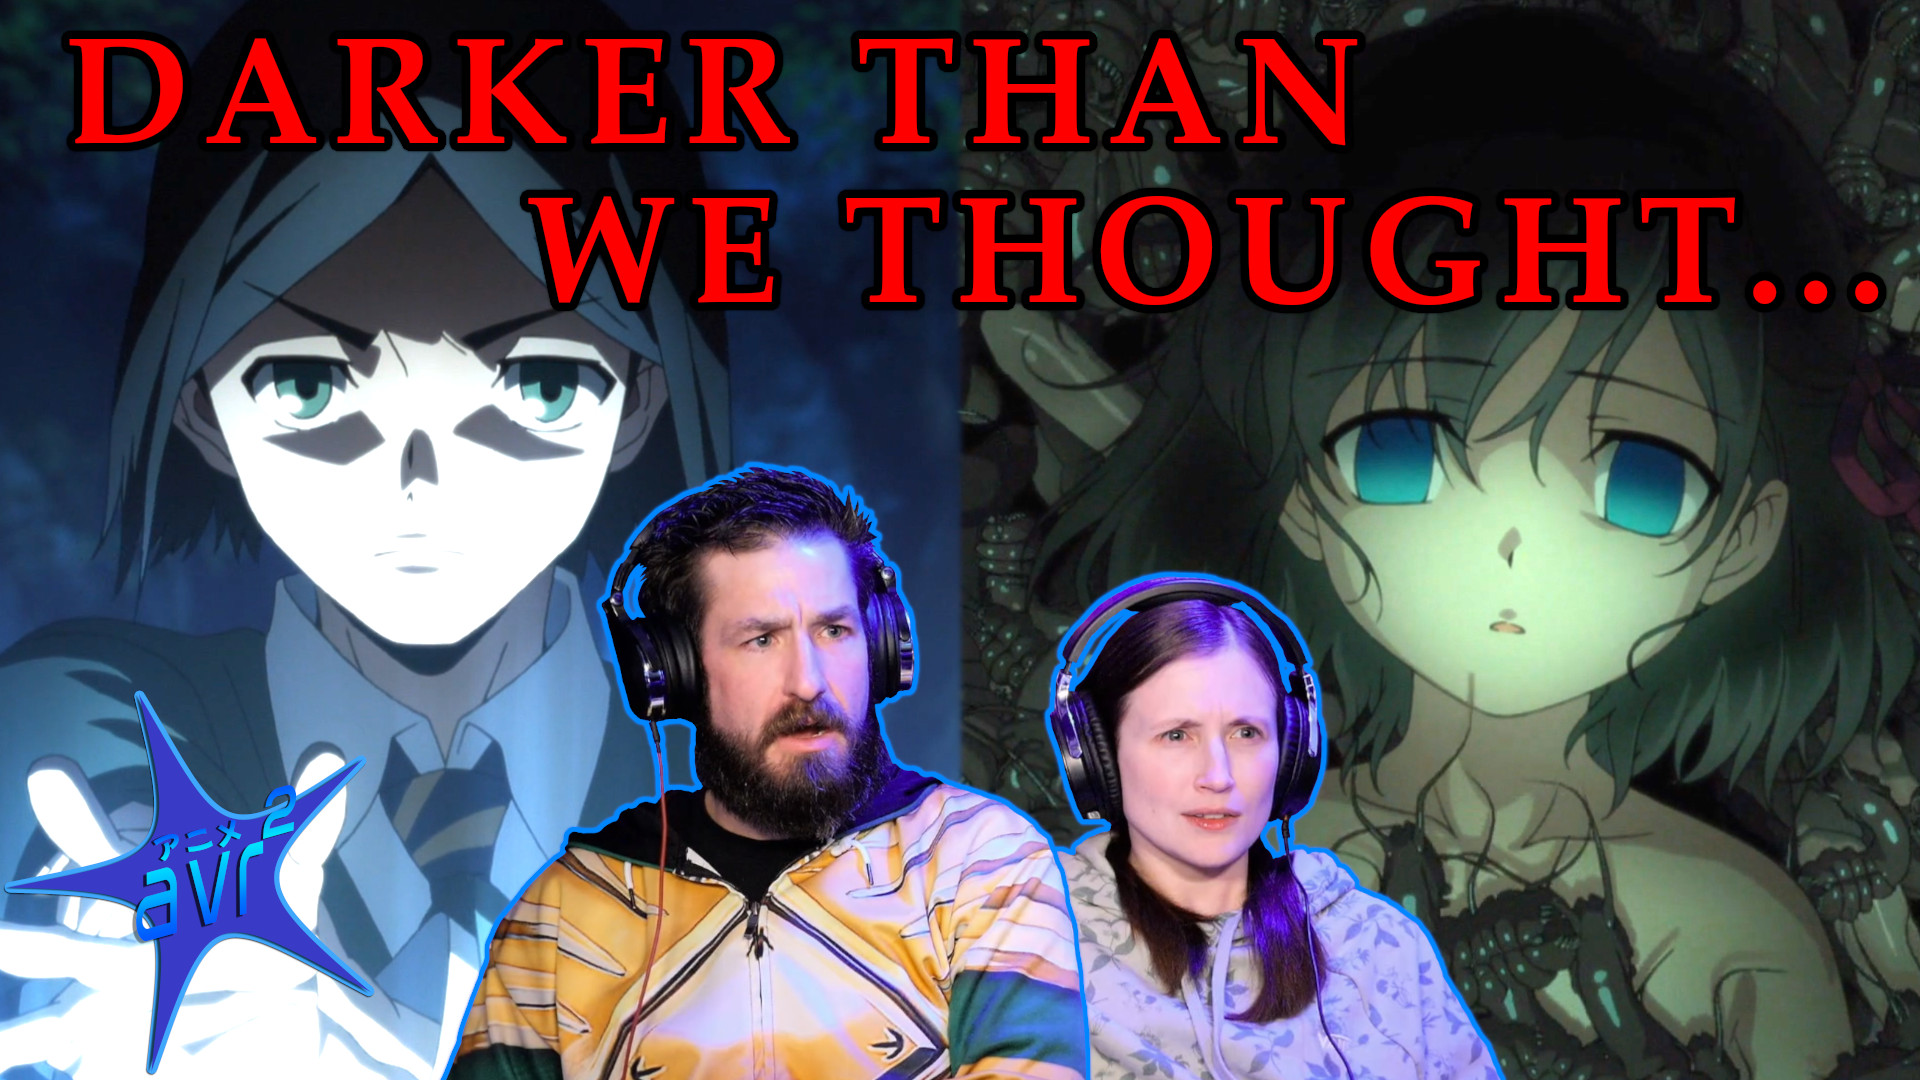 Fate/Zero Episode 1 Reaction: WAAAY DARKER THAN WE THOUGHT! | AVR2